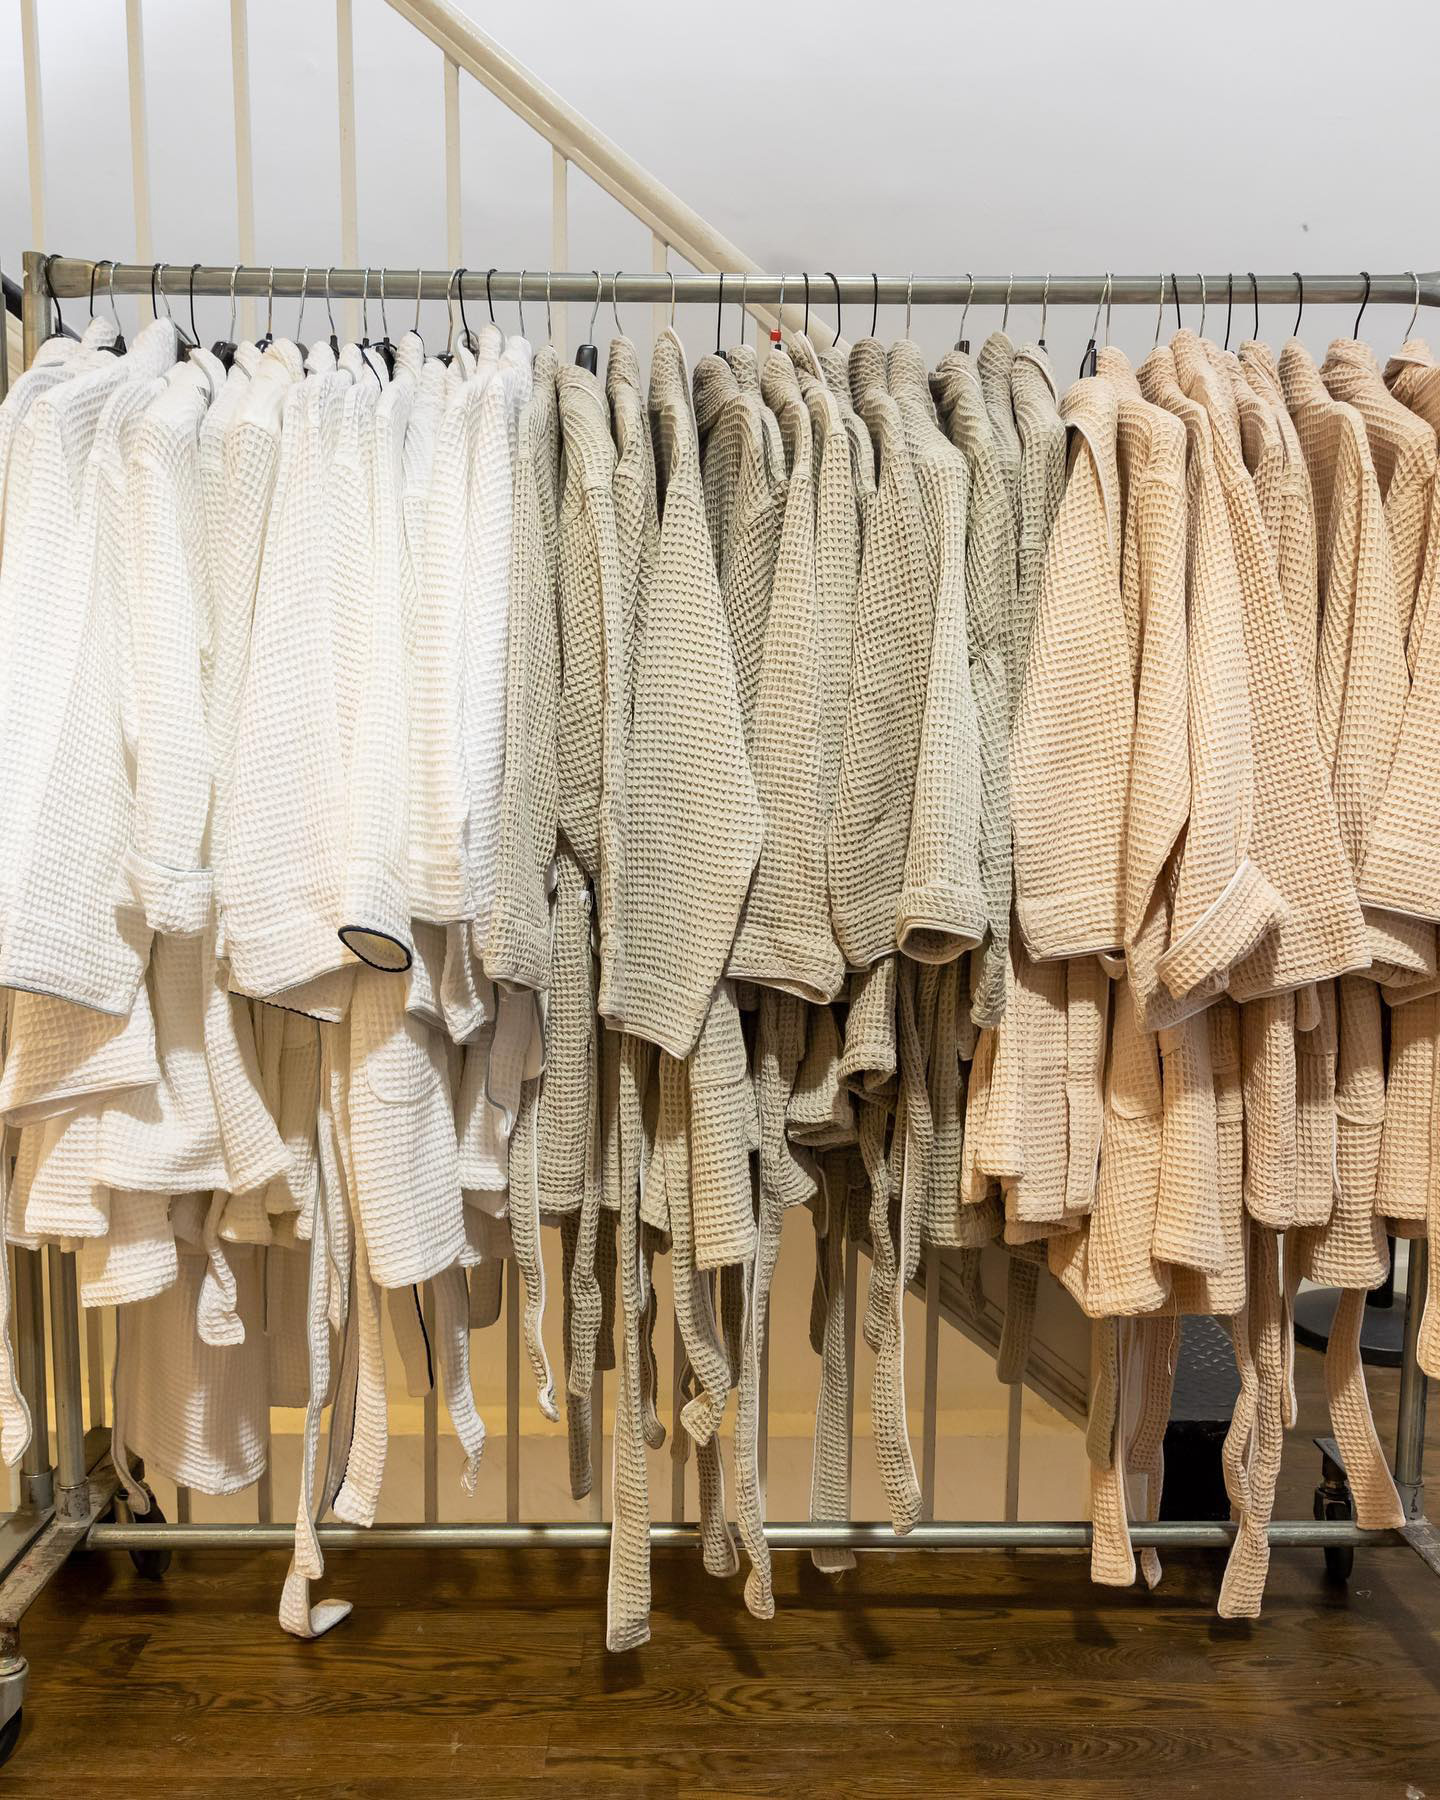 Boll & Branch Sample Sale in Images